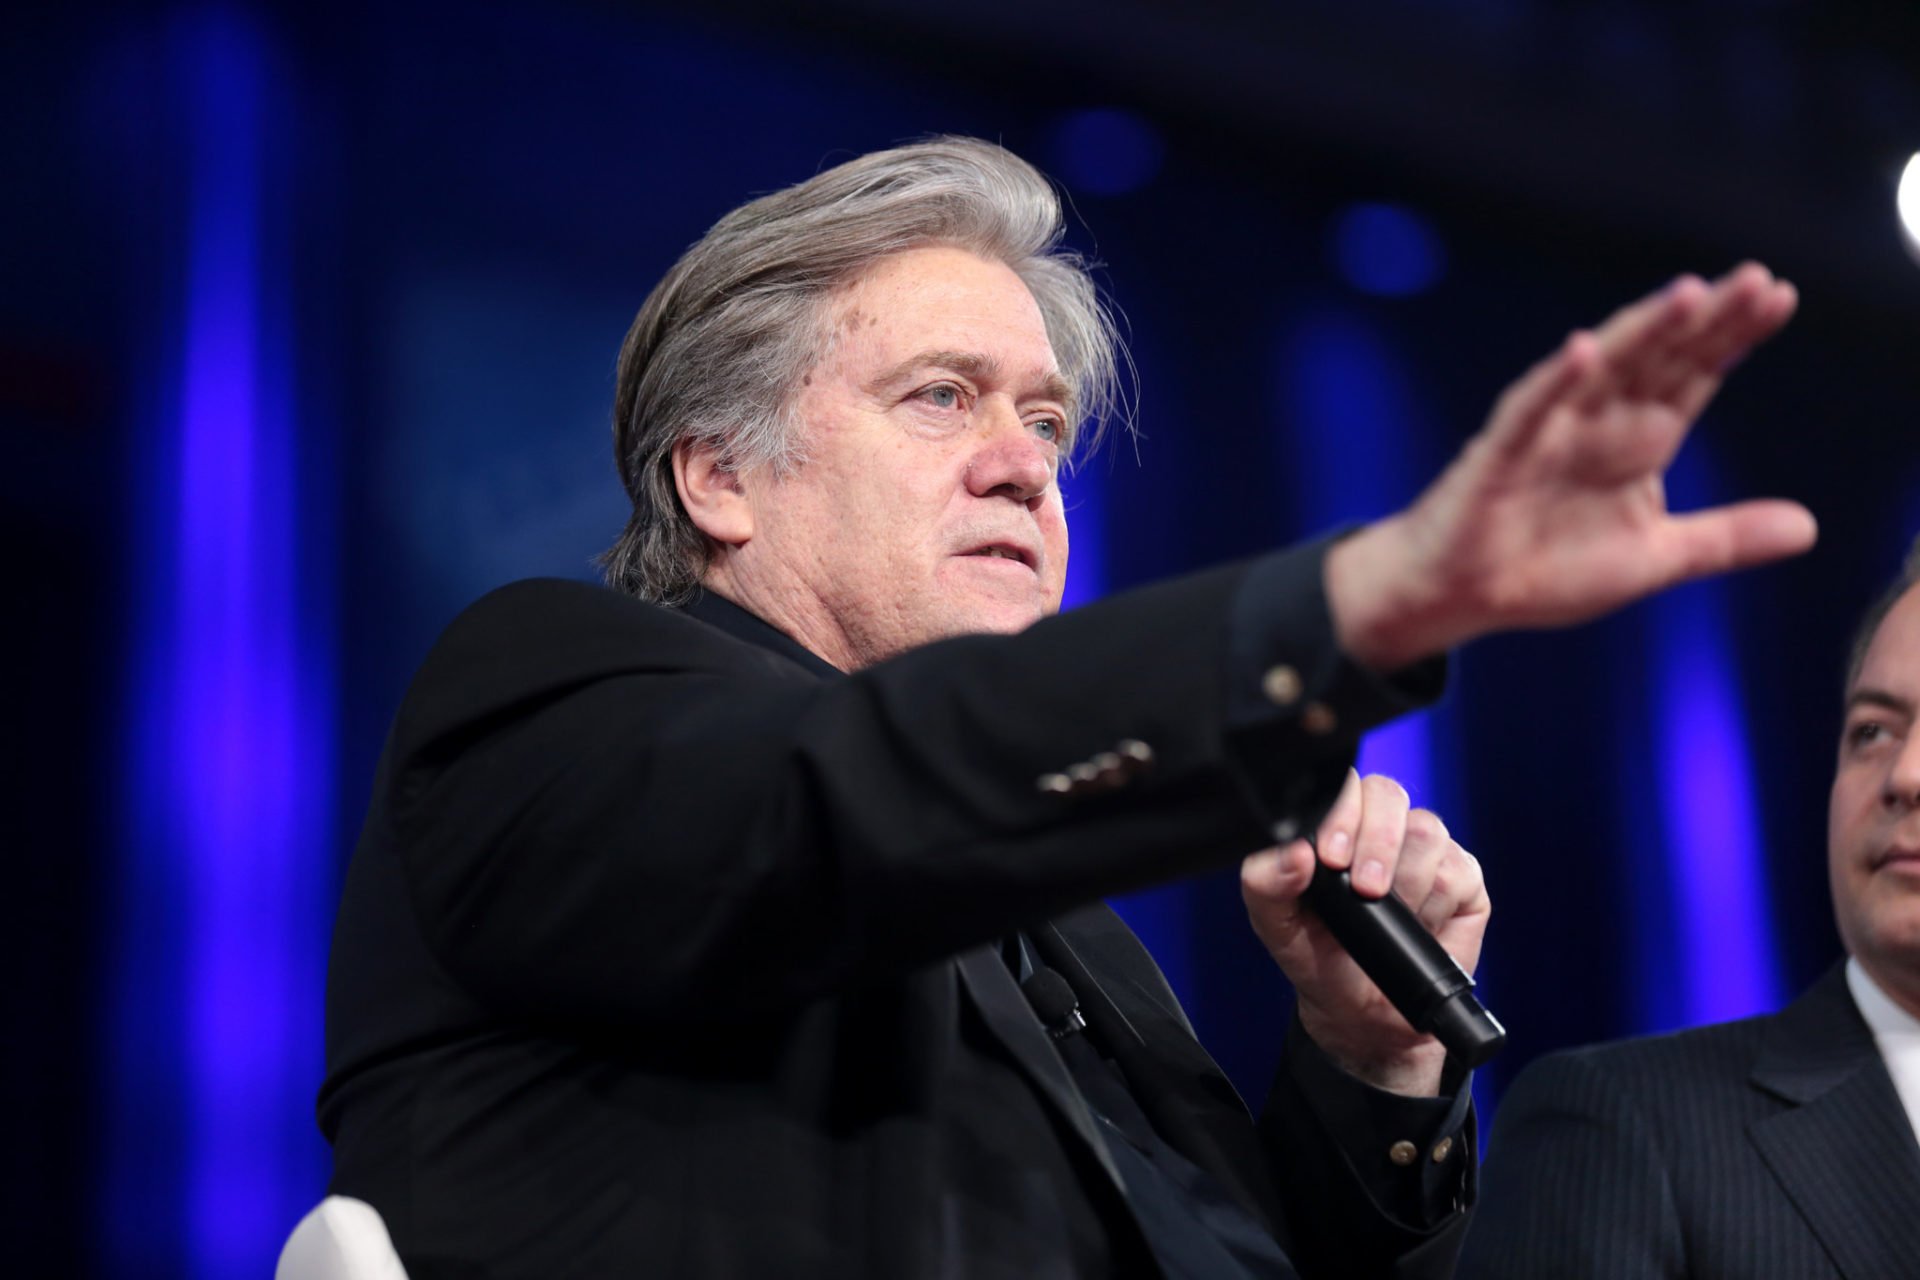 Steve Bannon To Release "Utility Tokens for the Populist Movement" 10